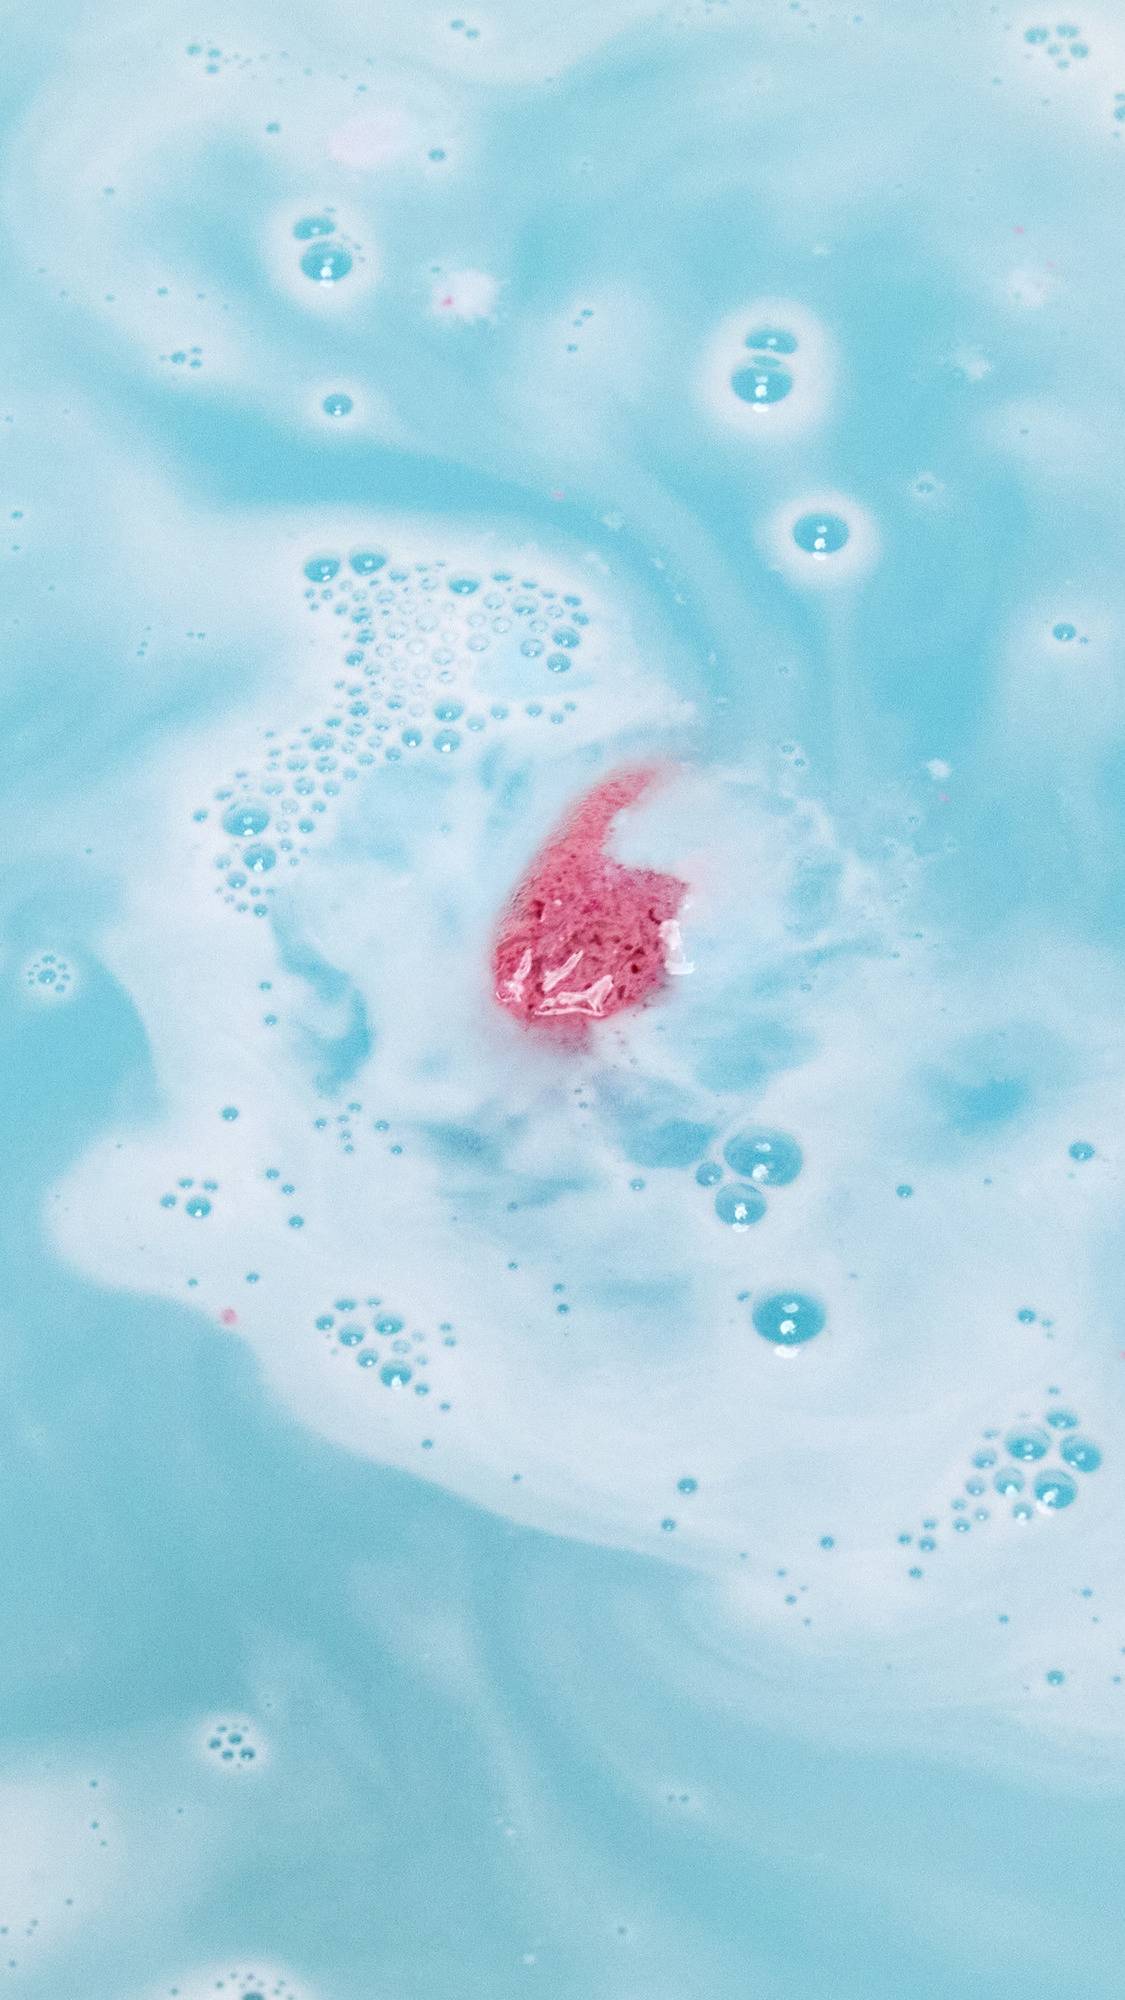 The Ickle Baby Bot bath bomb has fully dissolved leaving behind a mysterious glimpse of a surprise pink product floating on the crystal blue waters. 